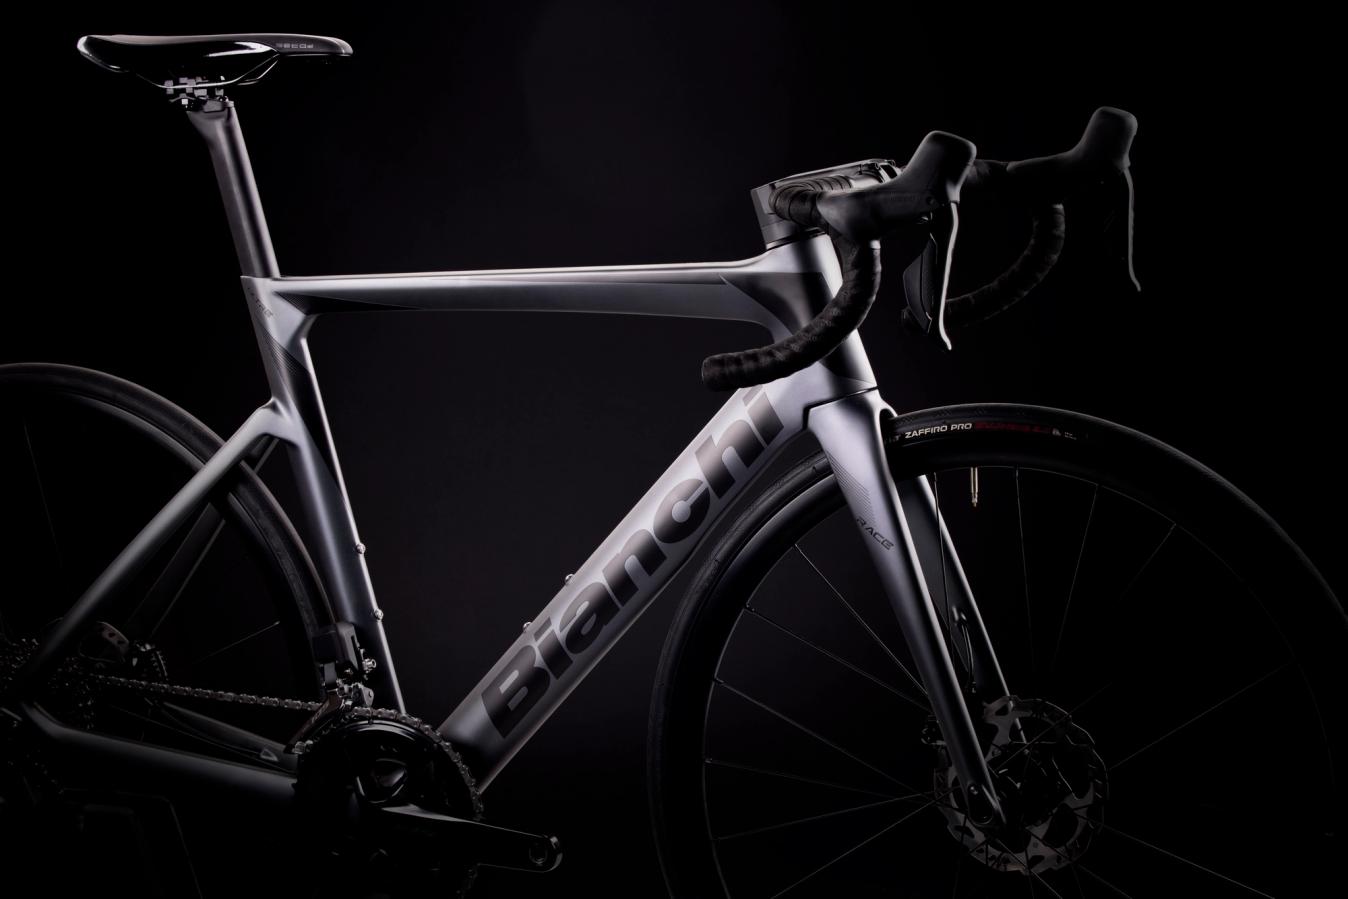 The new Oltre Race doesn't feature Bianchi's 'Air Deflector' technology